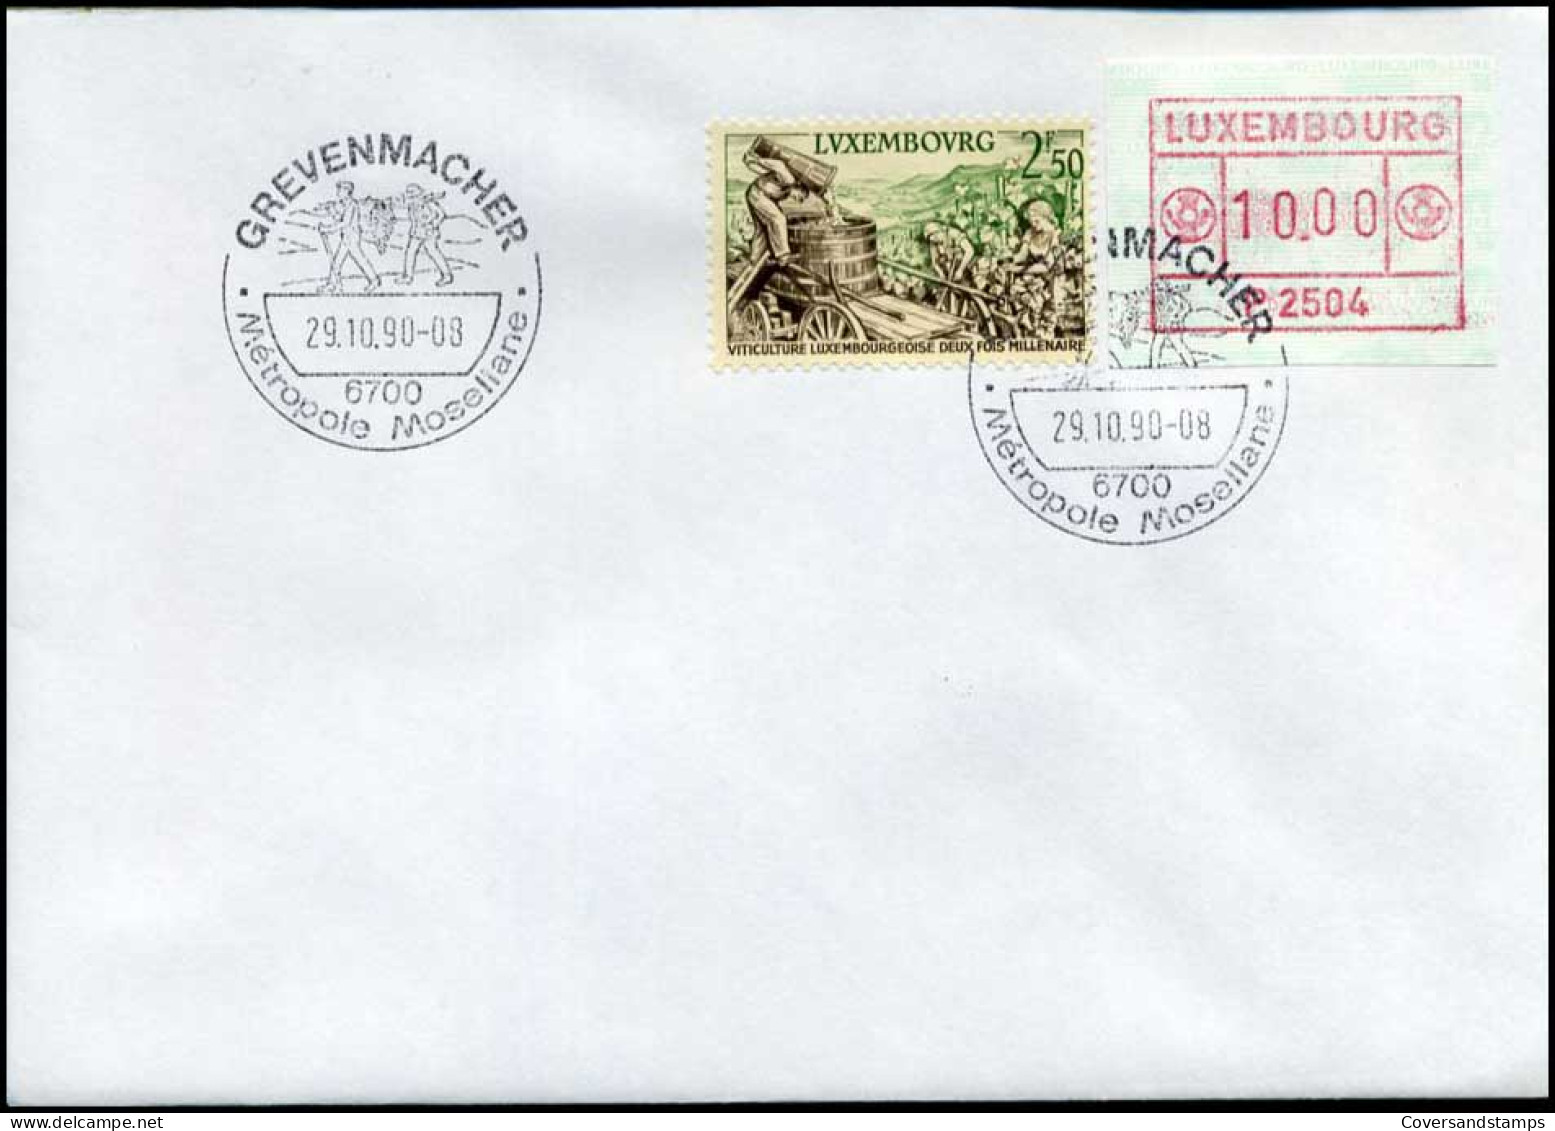 Luxembourg - FDC - ViticultureLuxembourgeoise Deux Fois Millenaire - FDC